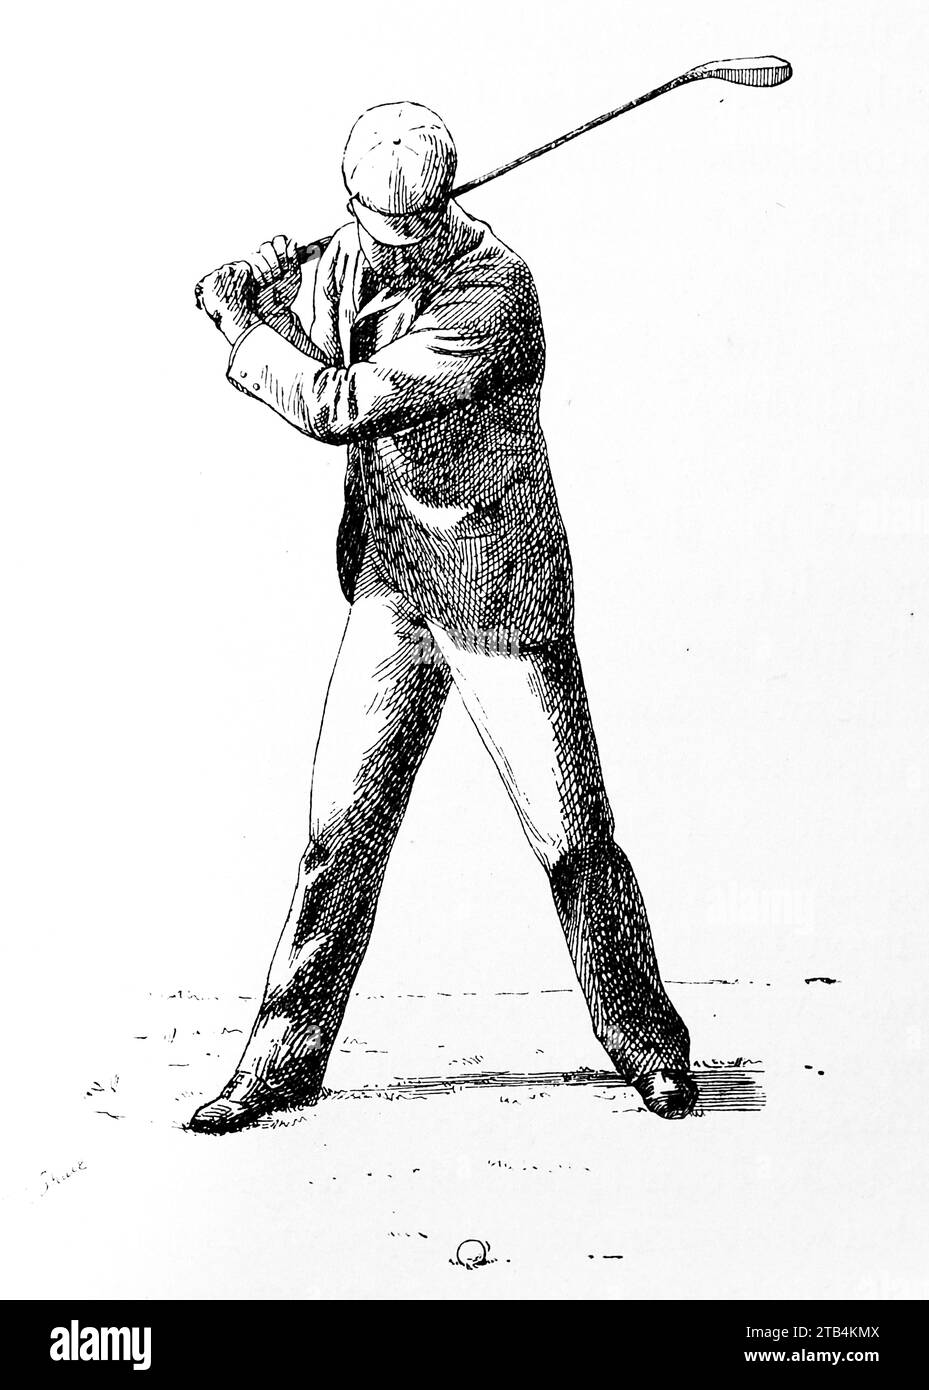 At the Top of the Swing (as it should not be), by E.L. Shute. From an illustration about golf, dating from 1889 to 1901. The history of golf is a long one. Though its origins are disputed, historians are generally agreed that what is known as “modern” golf began in the Middle Ages in Scotland. It was not until the mid to late nineteenth century that this sport became more popular in wider Britain, the British Empire and then the United States. Over the years the humble golf ball and golf club have changed vastly. Stock Photo